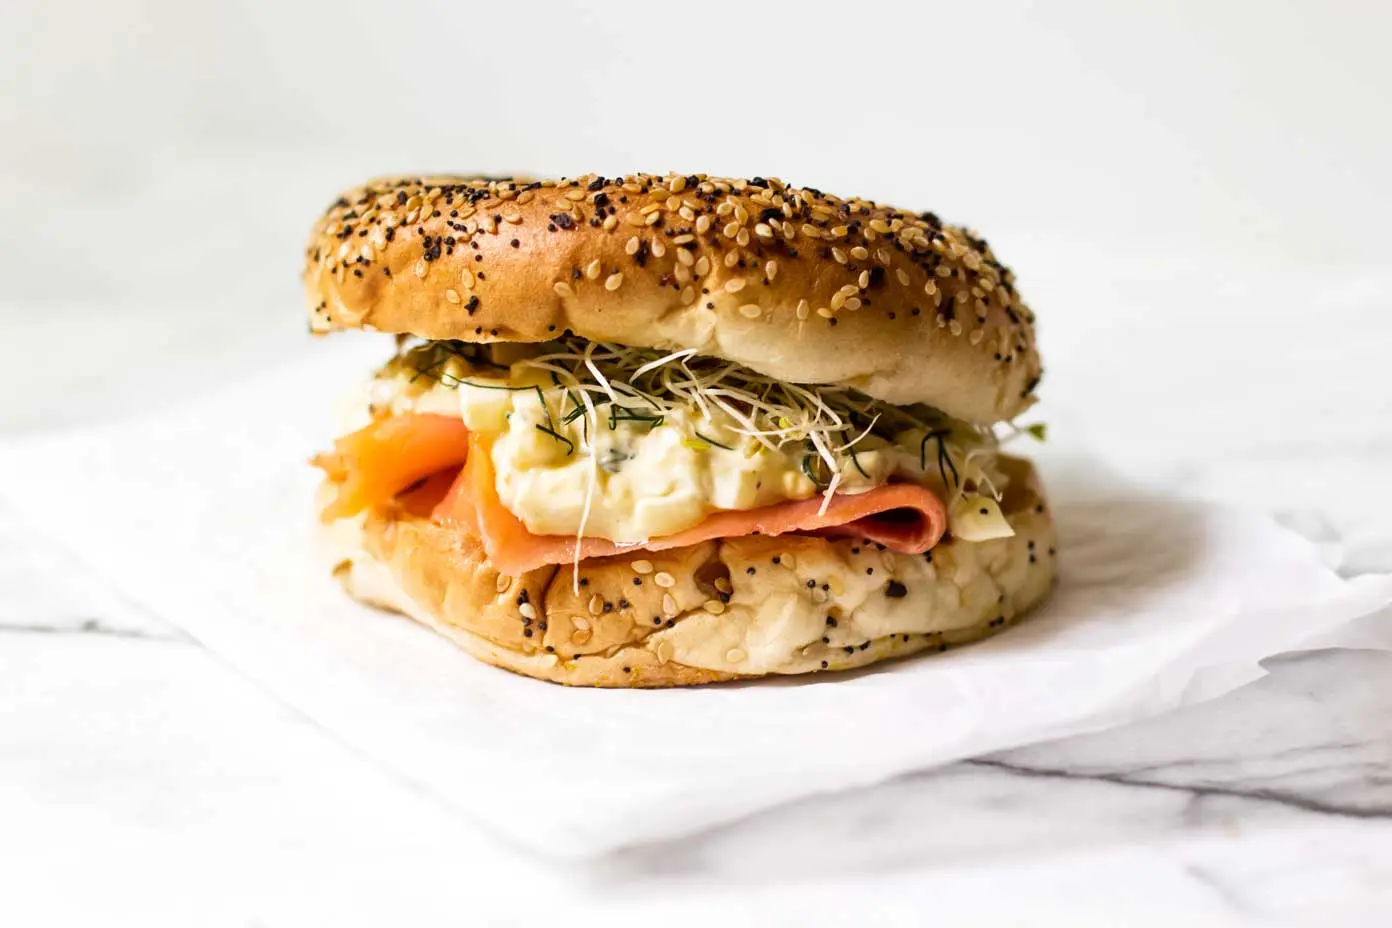 smoked salmon and egg mayo sandwich - What is it called when you put an egg on a sandwich